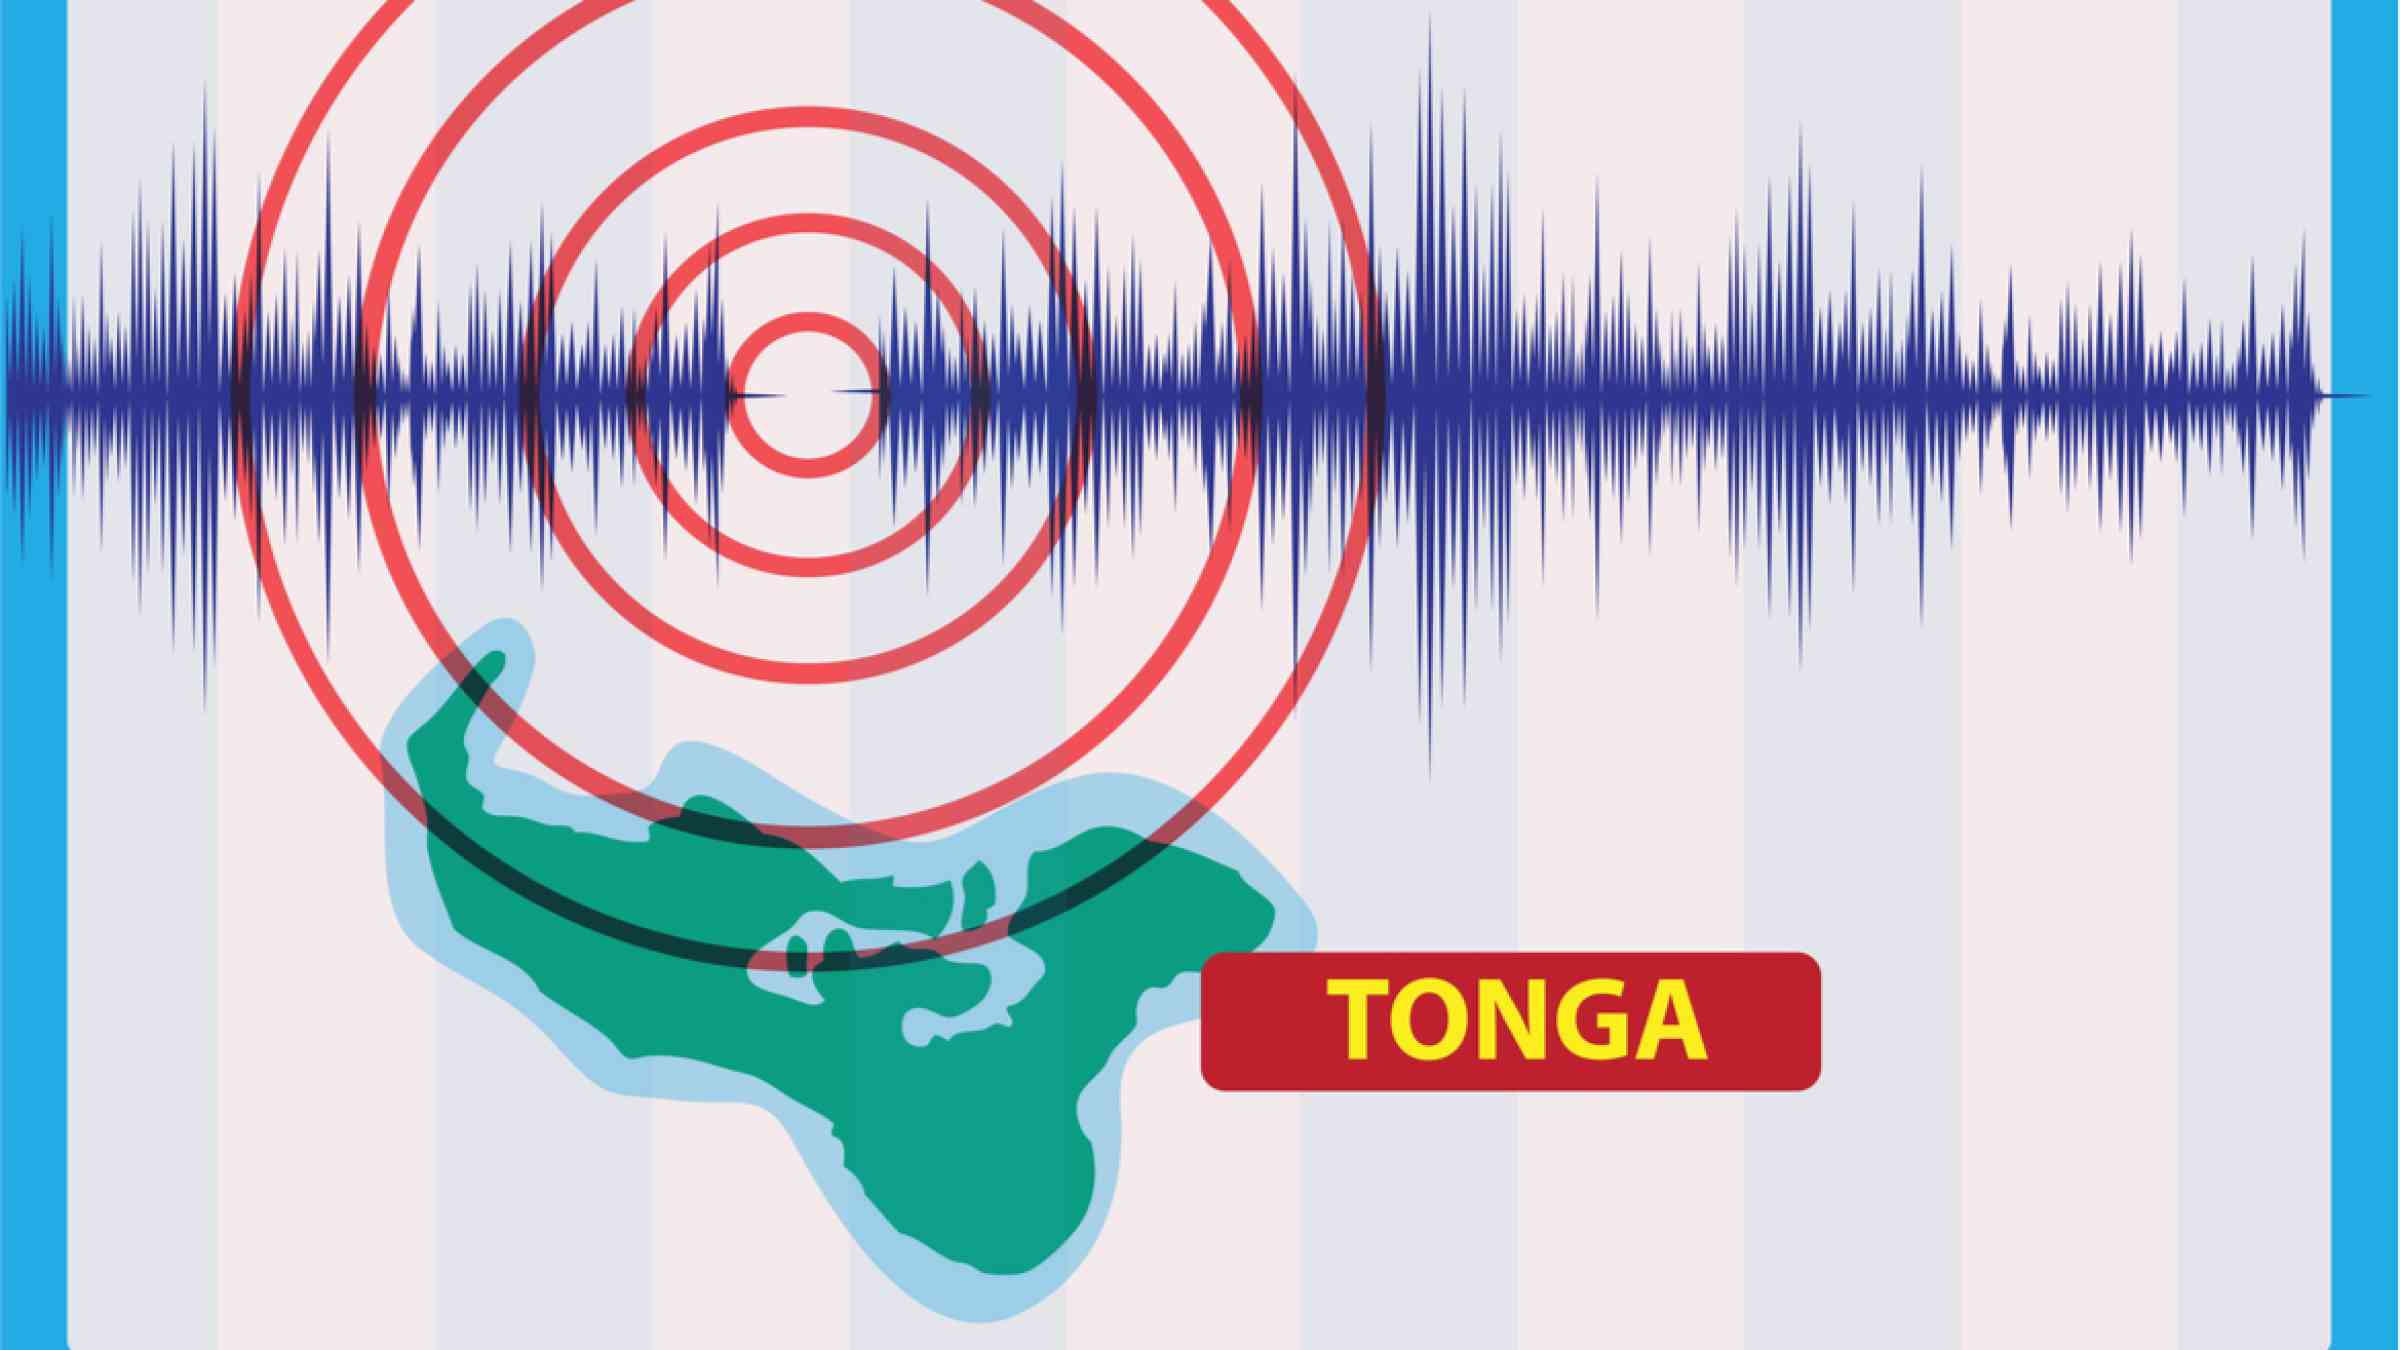 Shock wave near Tonga caused by natural disasters such as volcanic eruption or earthquake